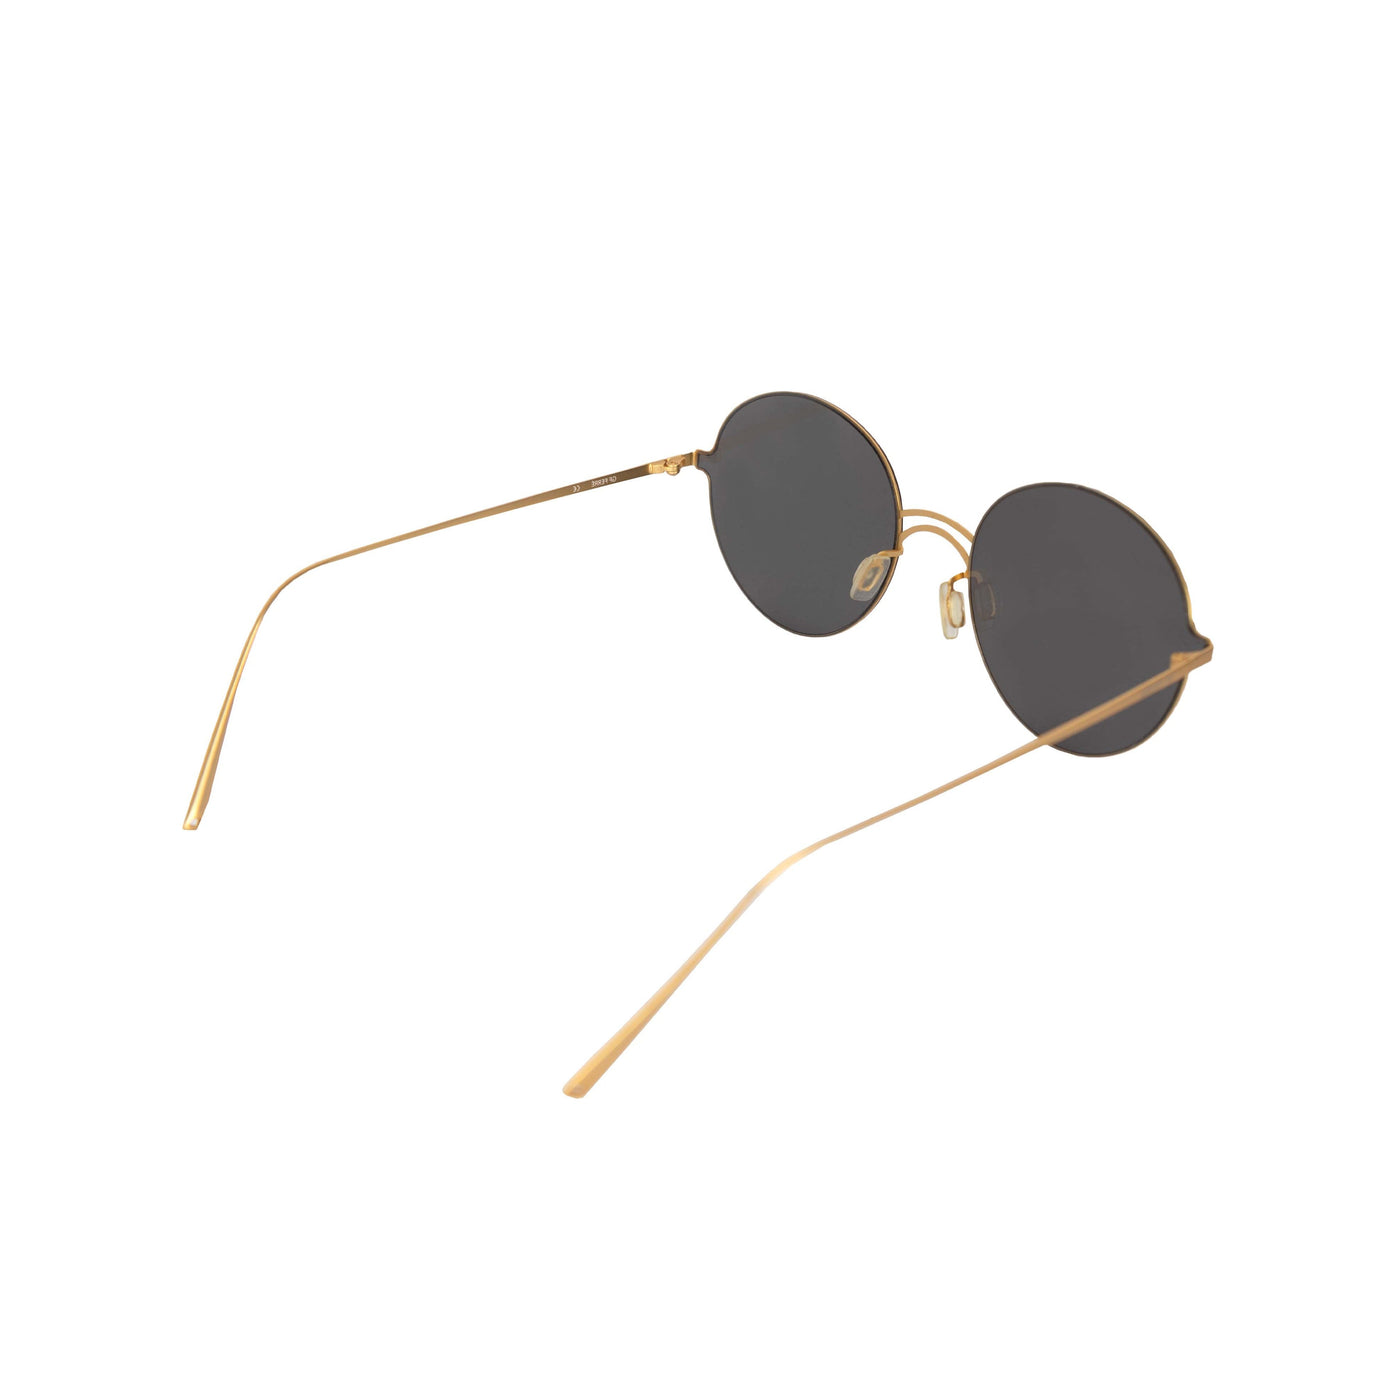 Secondhand Gianfranco Ferré Wire Rimmed Round Sunglasses